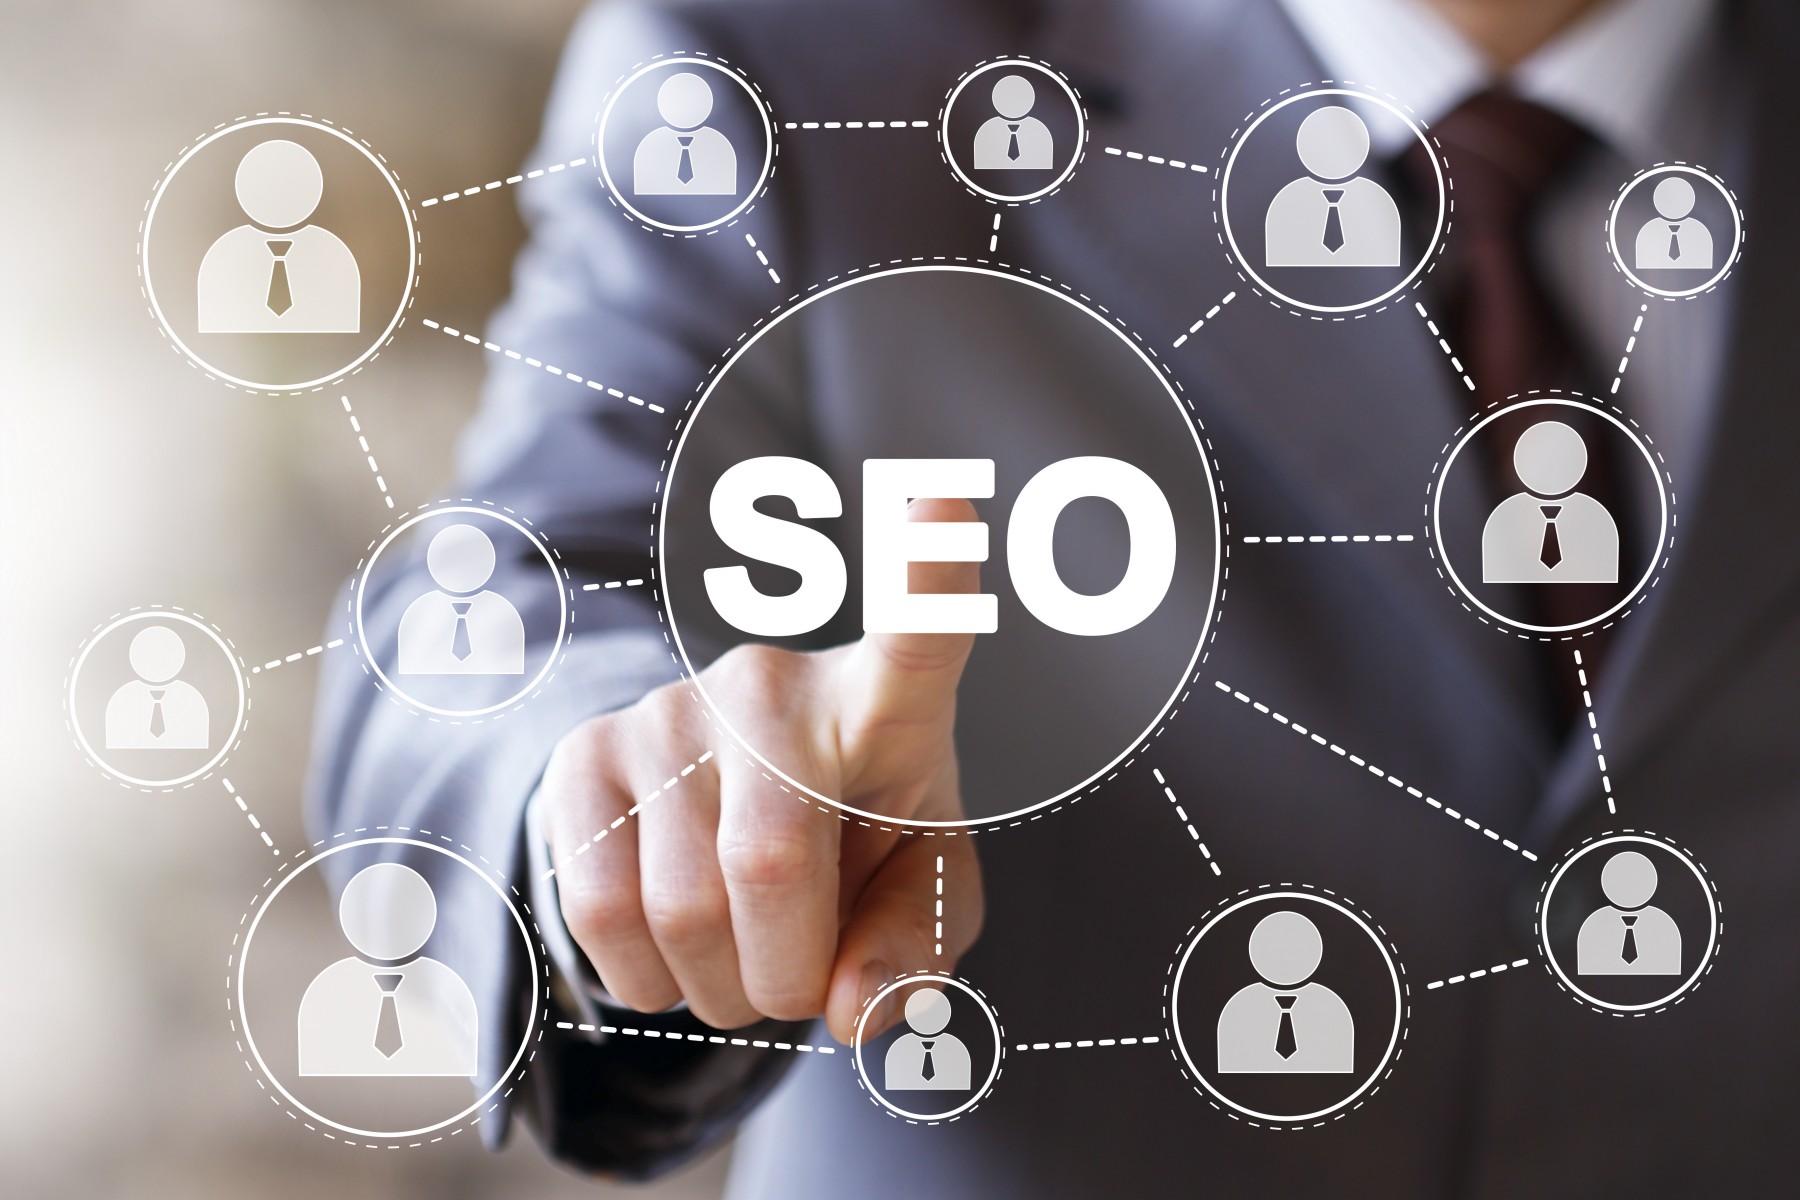 The Best SEO Agency In Essex That Offers Full Services